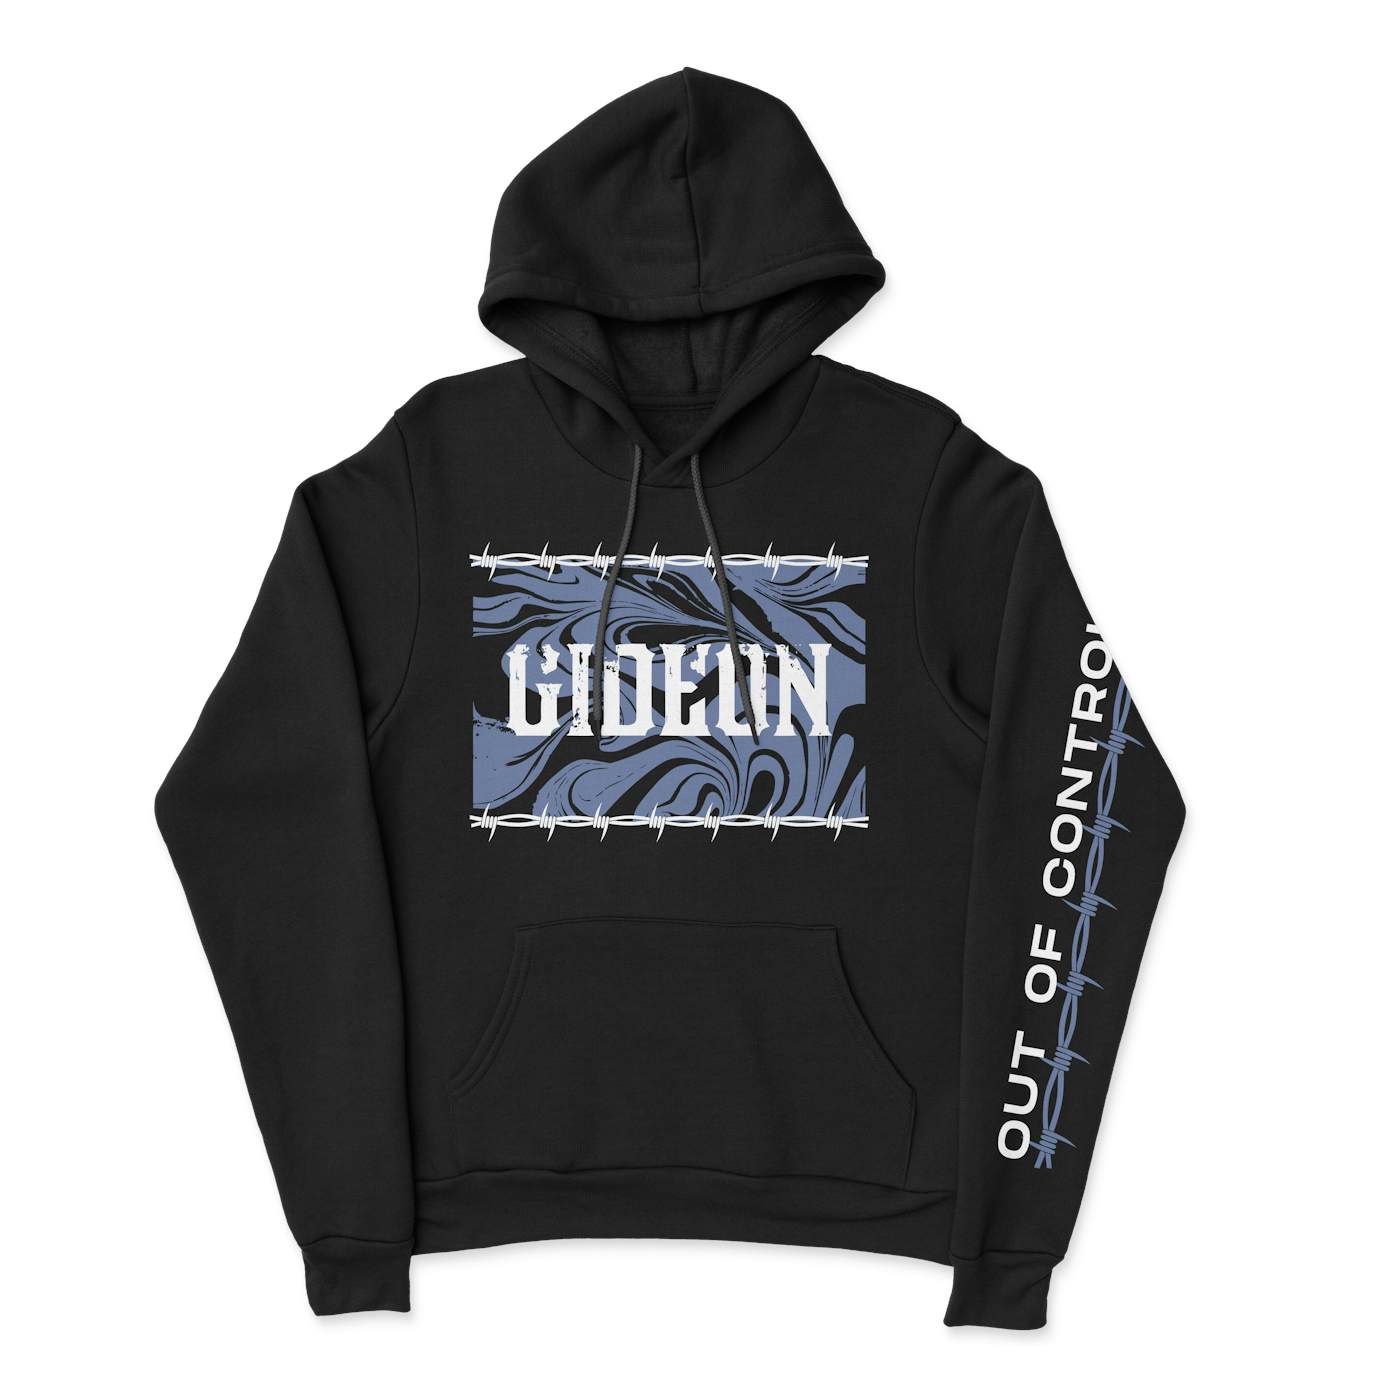 Gideon - Out of Control Hoodie